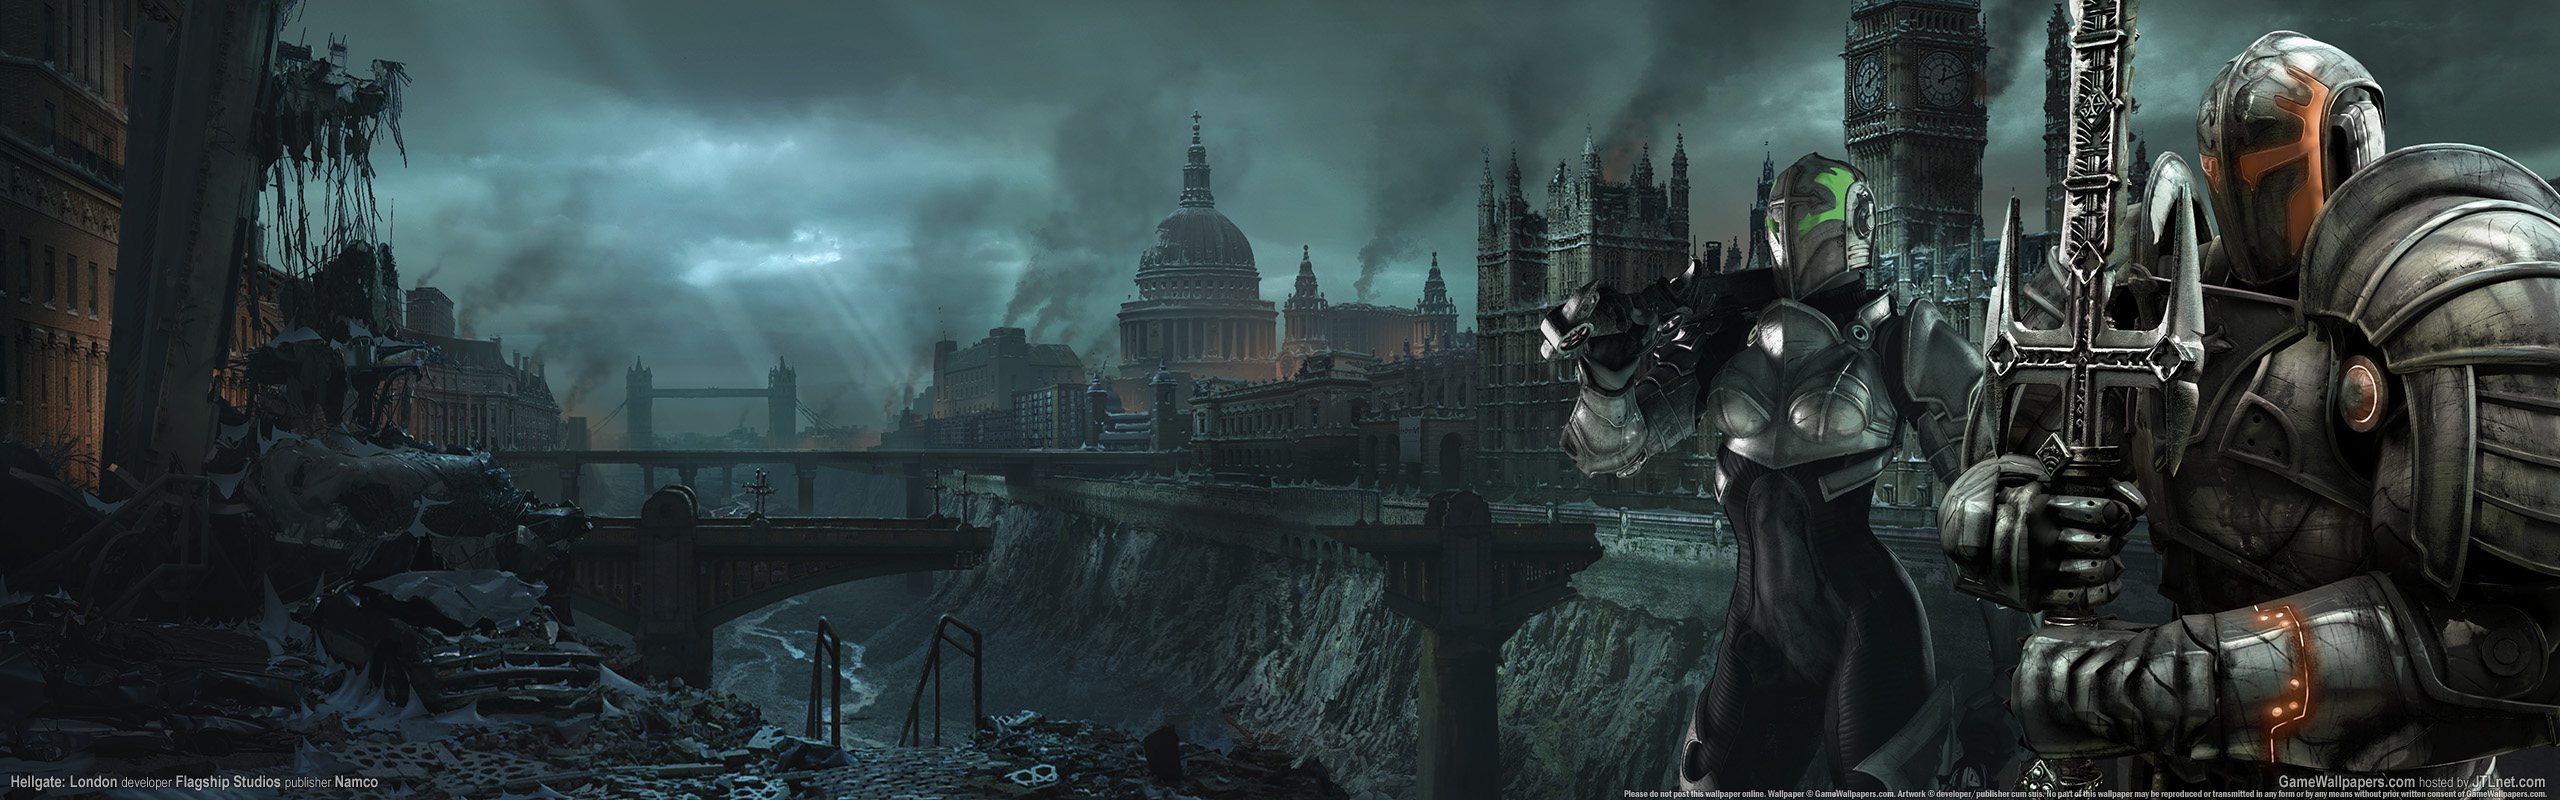 video game, hellgate: london lock screen backgrounds